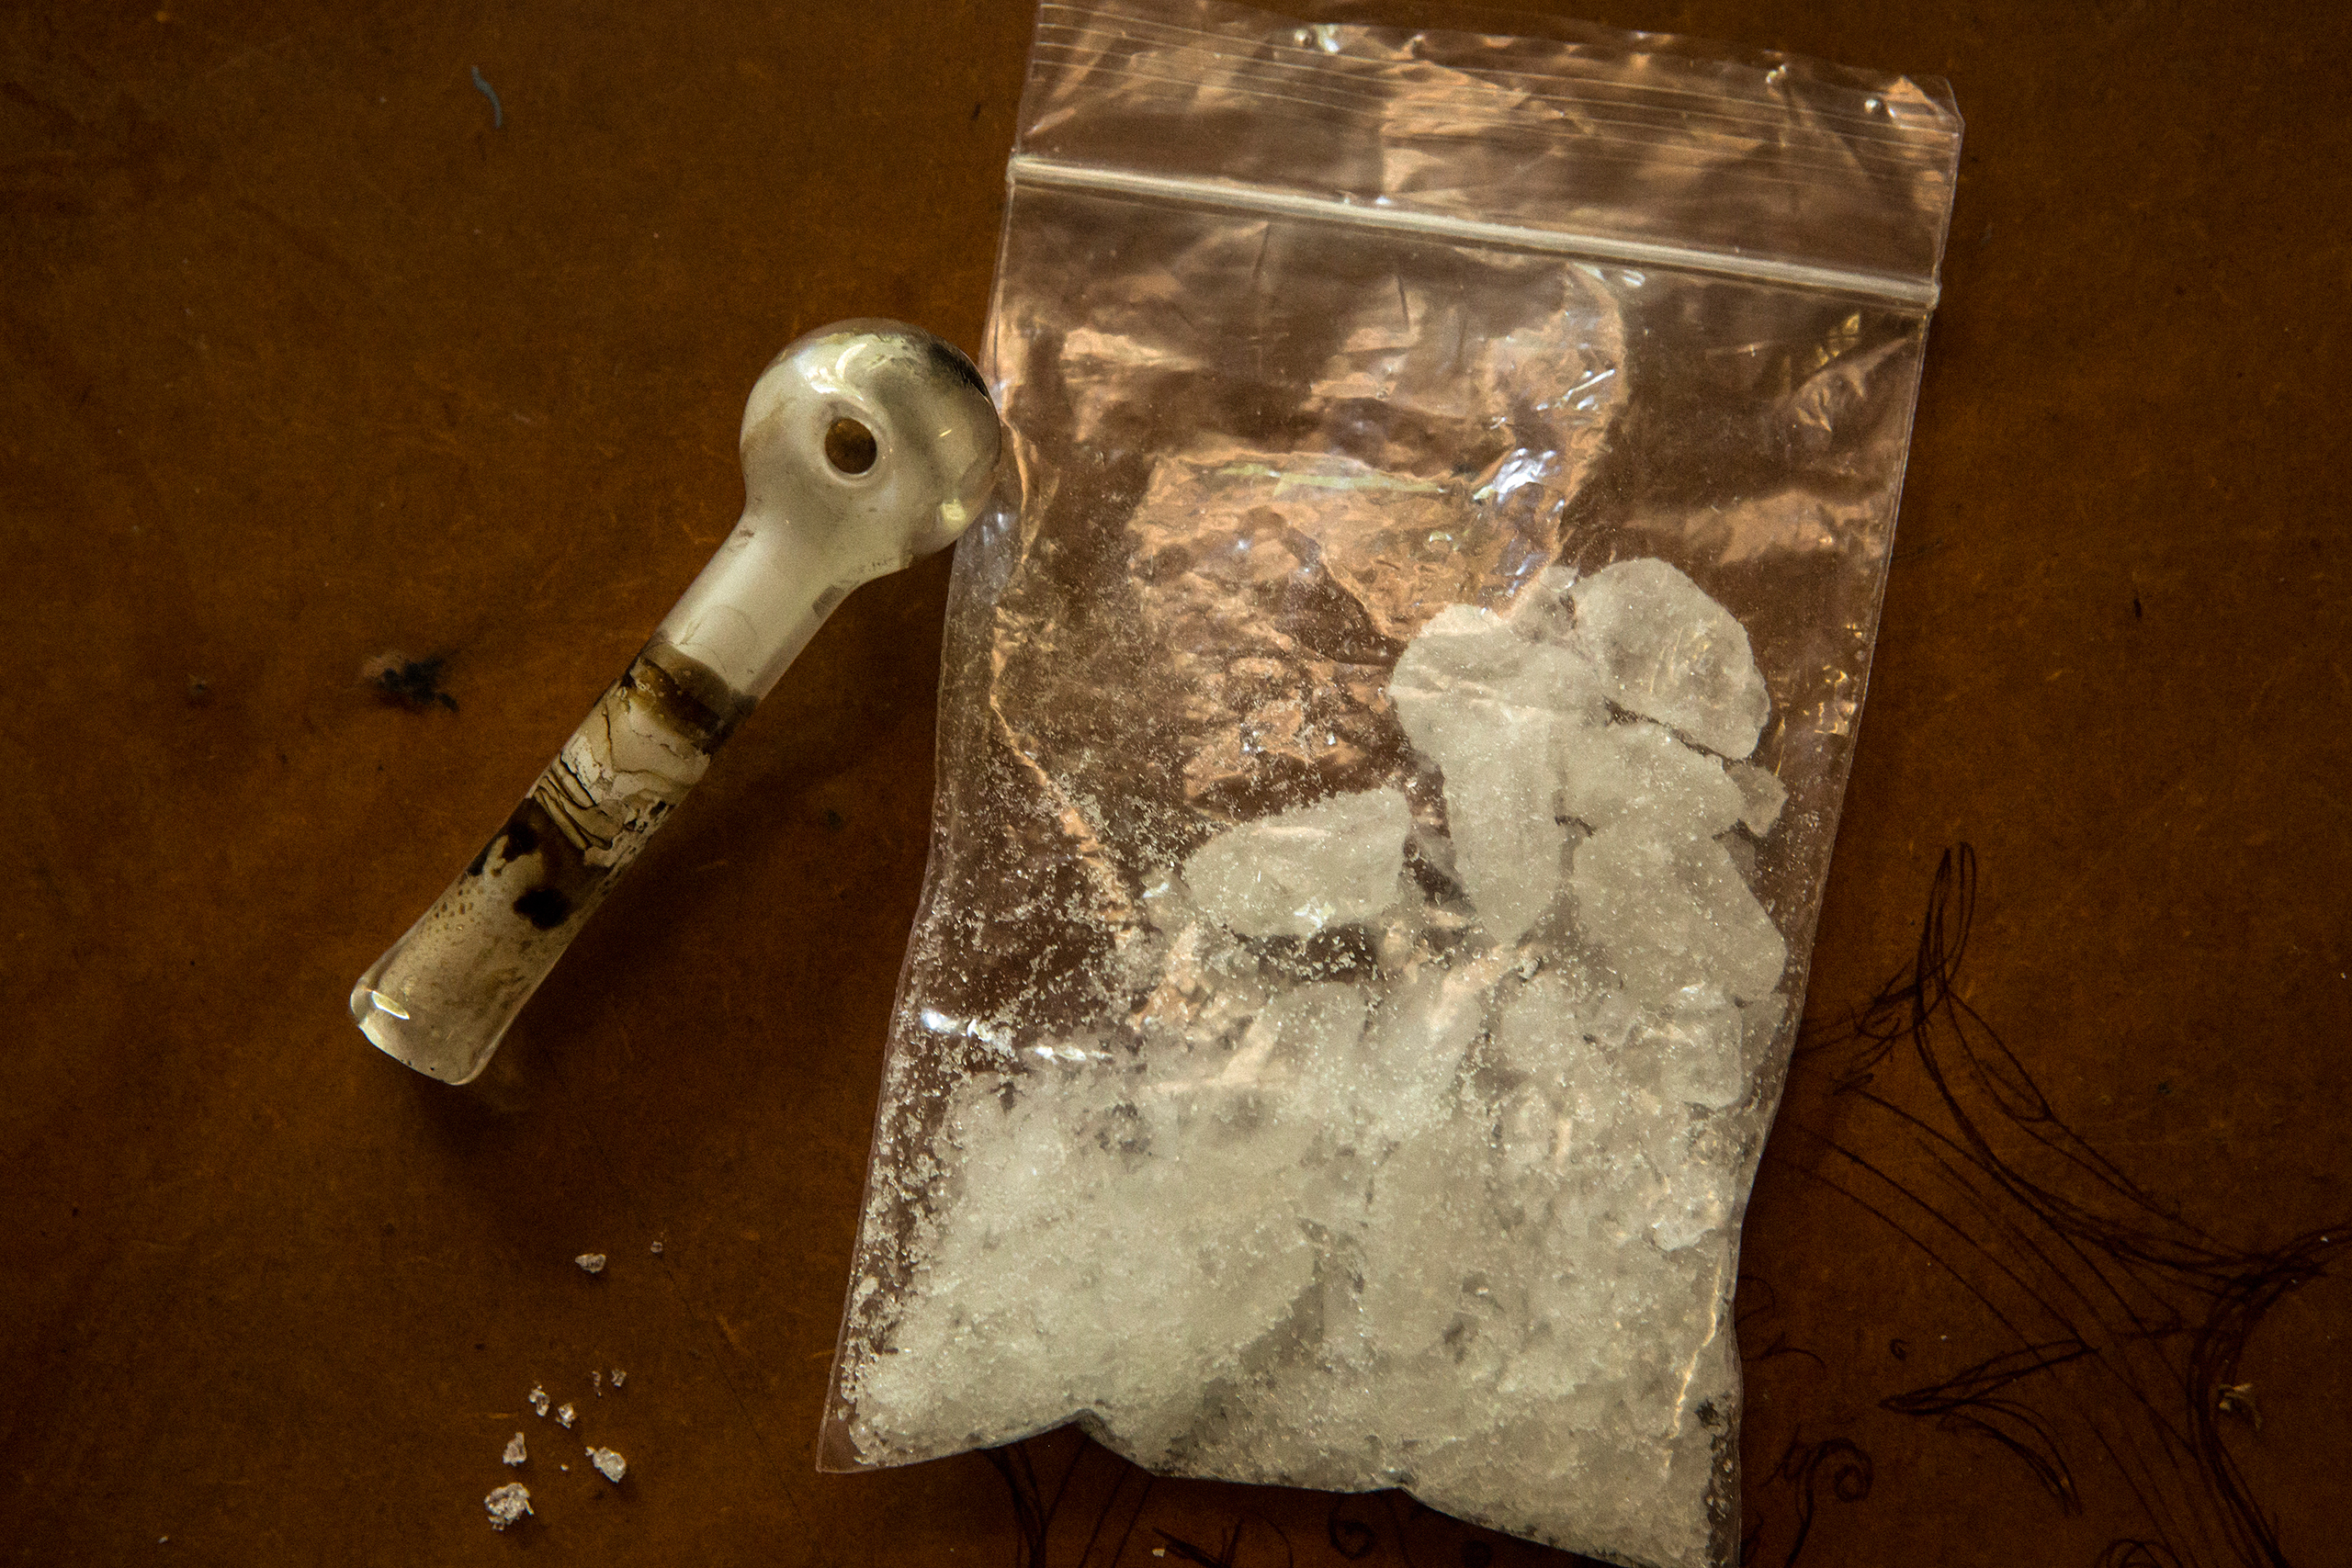 A bag of ice, about four-fifths of an ounce, next to a glass pipe in Rockhampton. (David Maurice Smith—Oculi for TIME)